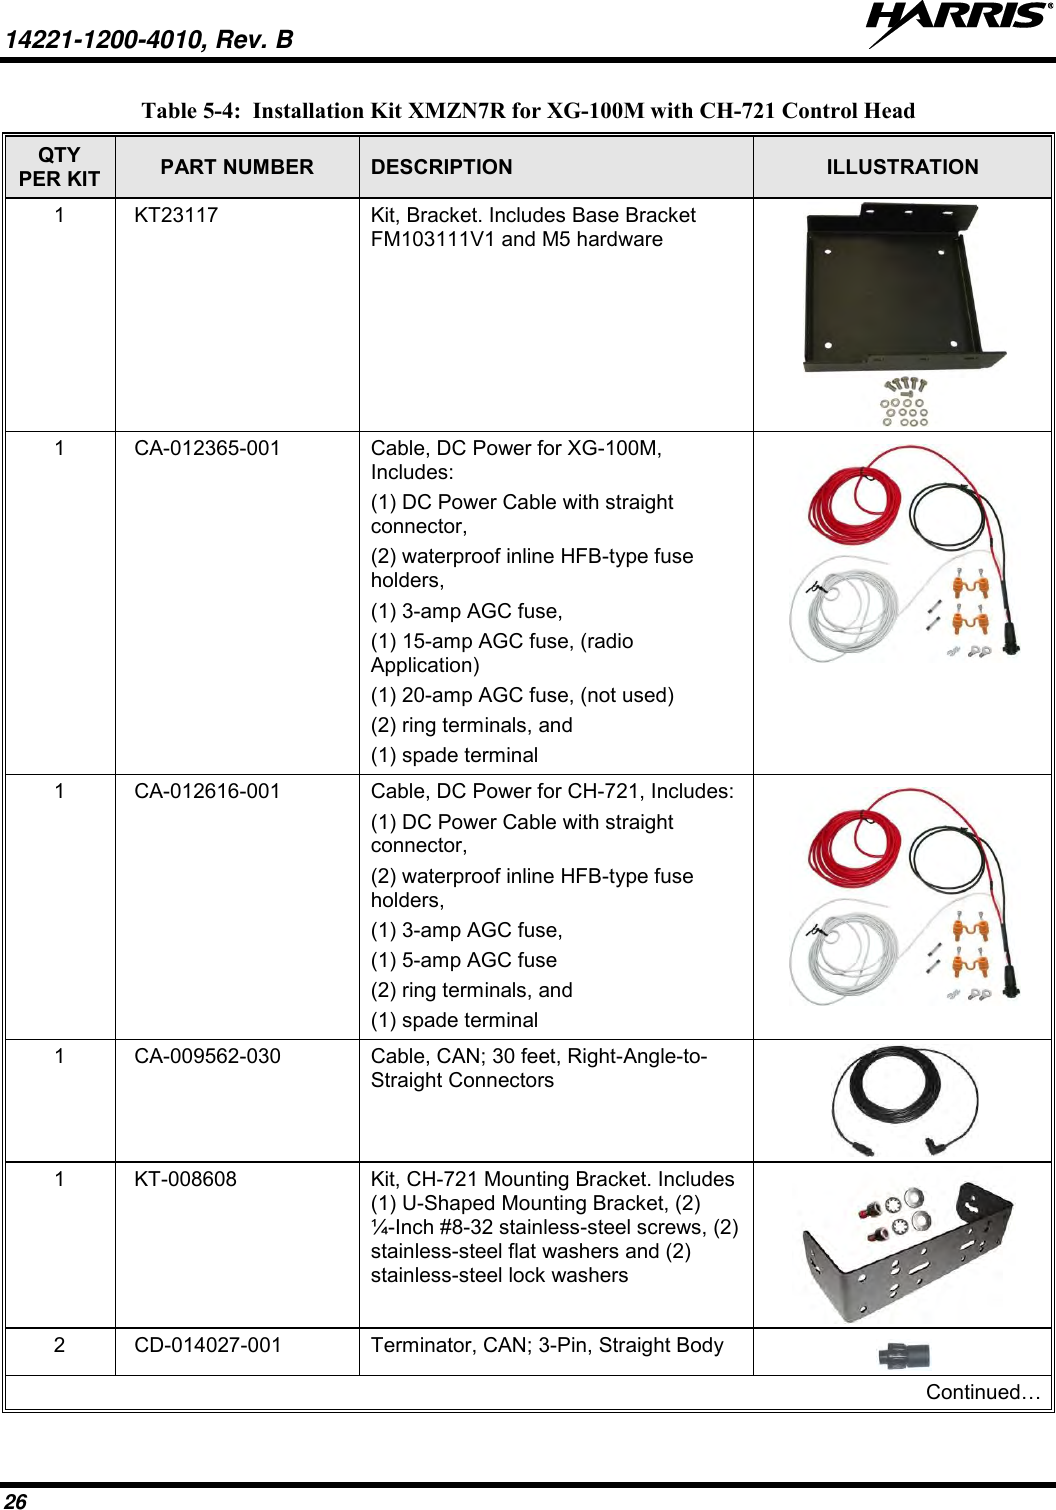 14221-1200-4010, Rev. B   26 Table 5-4:  Installation Kit XMZN7R for XG-100M with CH-721 Control Head QTY PER KIT PART NUMBER DESCRIPTION ILLUSTRATION 1 KT23117 Kit, Bracket. Includes Base Bracket FM103111V1 and M5 hardware   1 CA-012365-001 Cable, DC Power for XG-100M, Includes:  (1) DC Power Cable with straight connector,  (2) waterproof inline HFB-type fuse holders,  (1) 3-amp AGC fuse,  (1) 15-amp AGC fuse, (radio Application) (1) 20-amp AGC fuse, (not used) (2) ring terminals, and (1) spade terminal  1 CA-012616-001 Cable, DC Power for CH-721, Includes:  (1) DC Power Cable with straight connector,  (2) waterproof inline HFB-type fuse holders,  (1) 3-amp AGC fuse,  (1) 5-amp AGC fuse (2) ring terminals, and (1) spade terminal  1 CA-009562-030 Cable, CAN; 30 feet, Right-Angle-to-Straight Connectors  1 KT-008608 Kit, CH-721 Mounting Bracket. Includes (1) U-Shaped Mounting Bracket, (2) ¼-Inch #8-32 stainless-steel screws, (2) stainless-steel flat washers and (2) stainless-steel lock washers  2 CD-014027-001 Terminator, CAN; 3-Pin, Straight Body  Continued… 